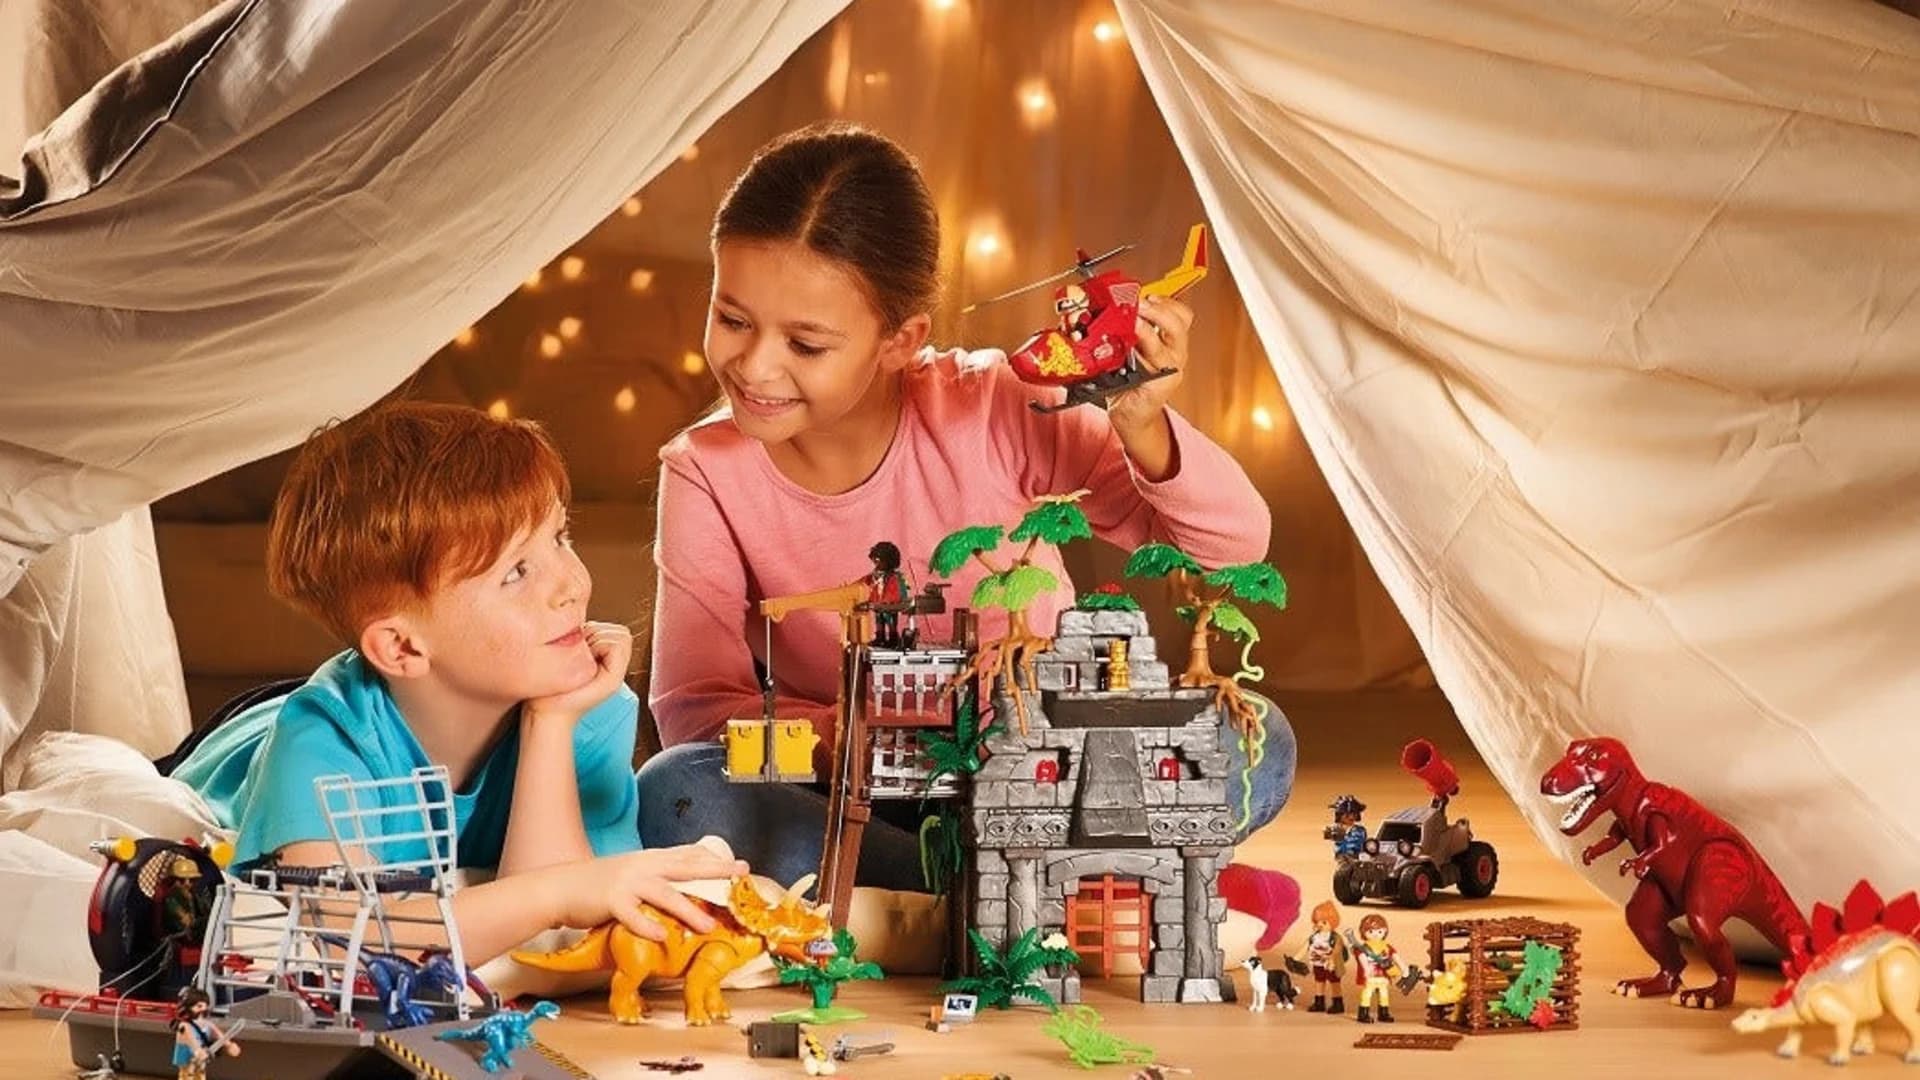 PHOTOS: Top-rated toys as voted on by kids